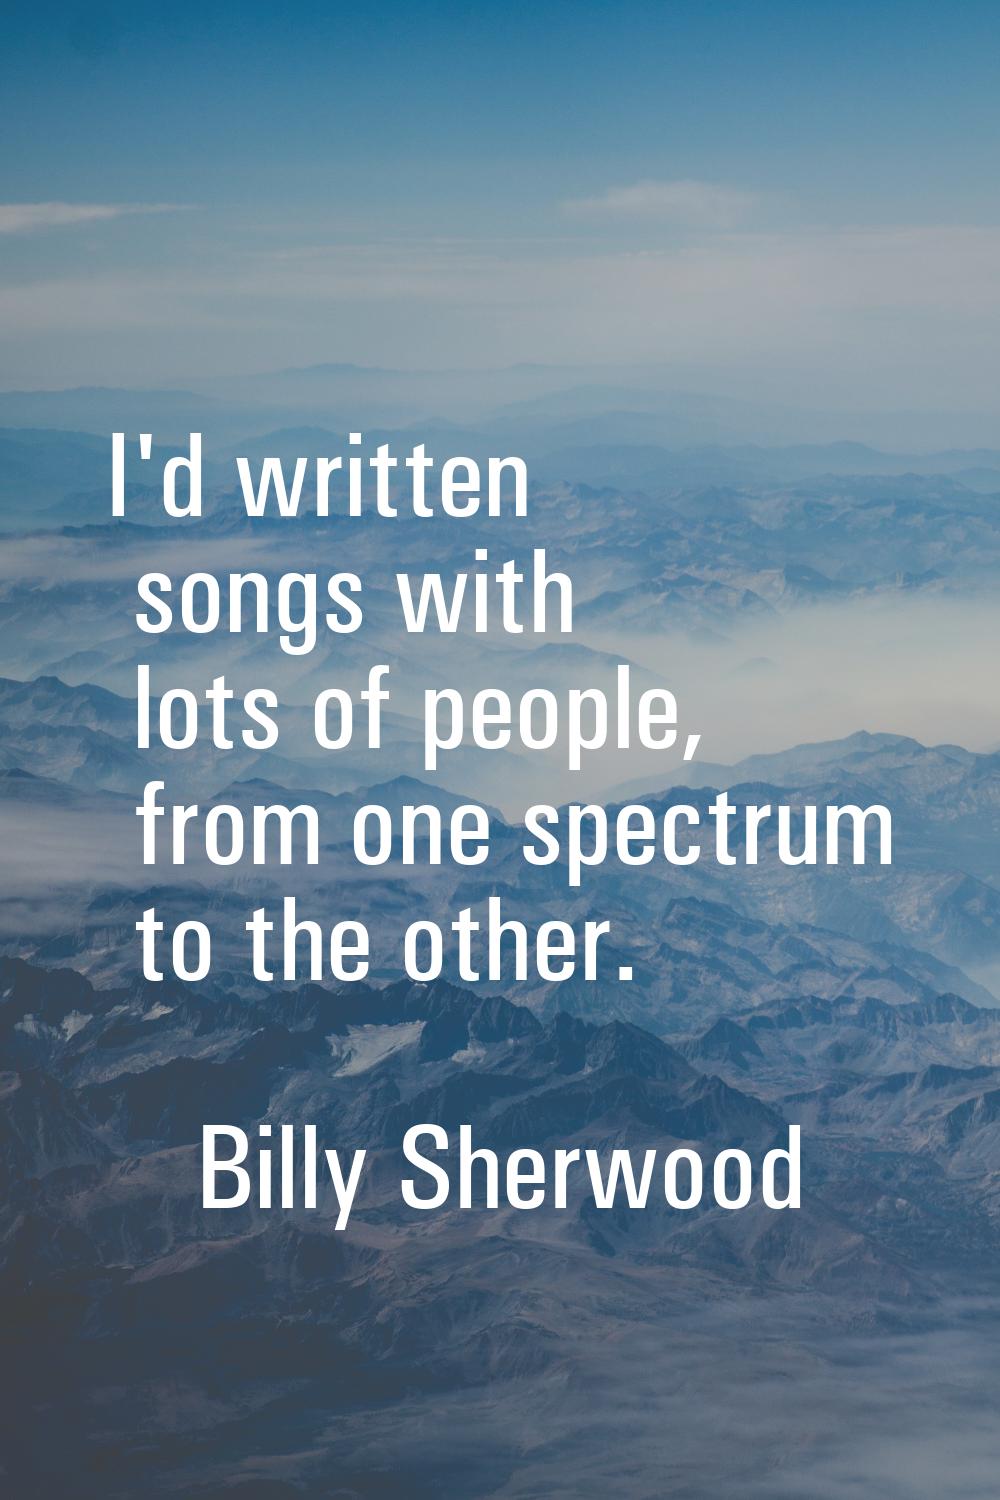 I'd written songs with lots of people, from one spectrum to the other.